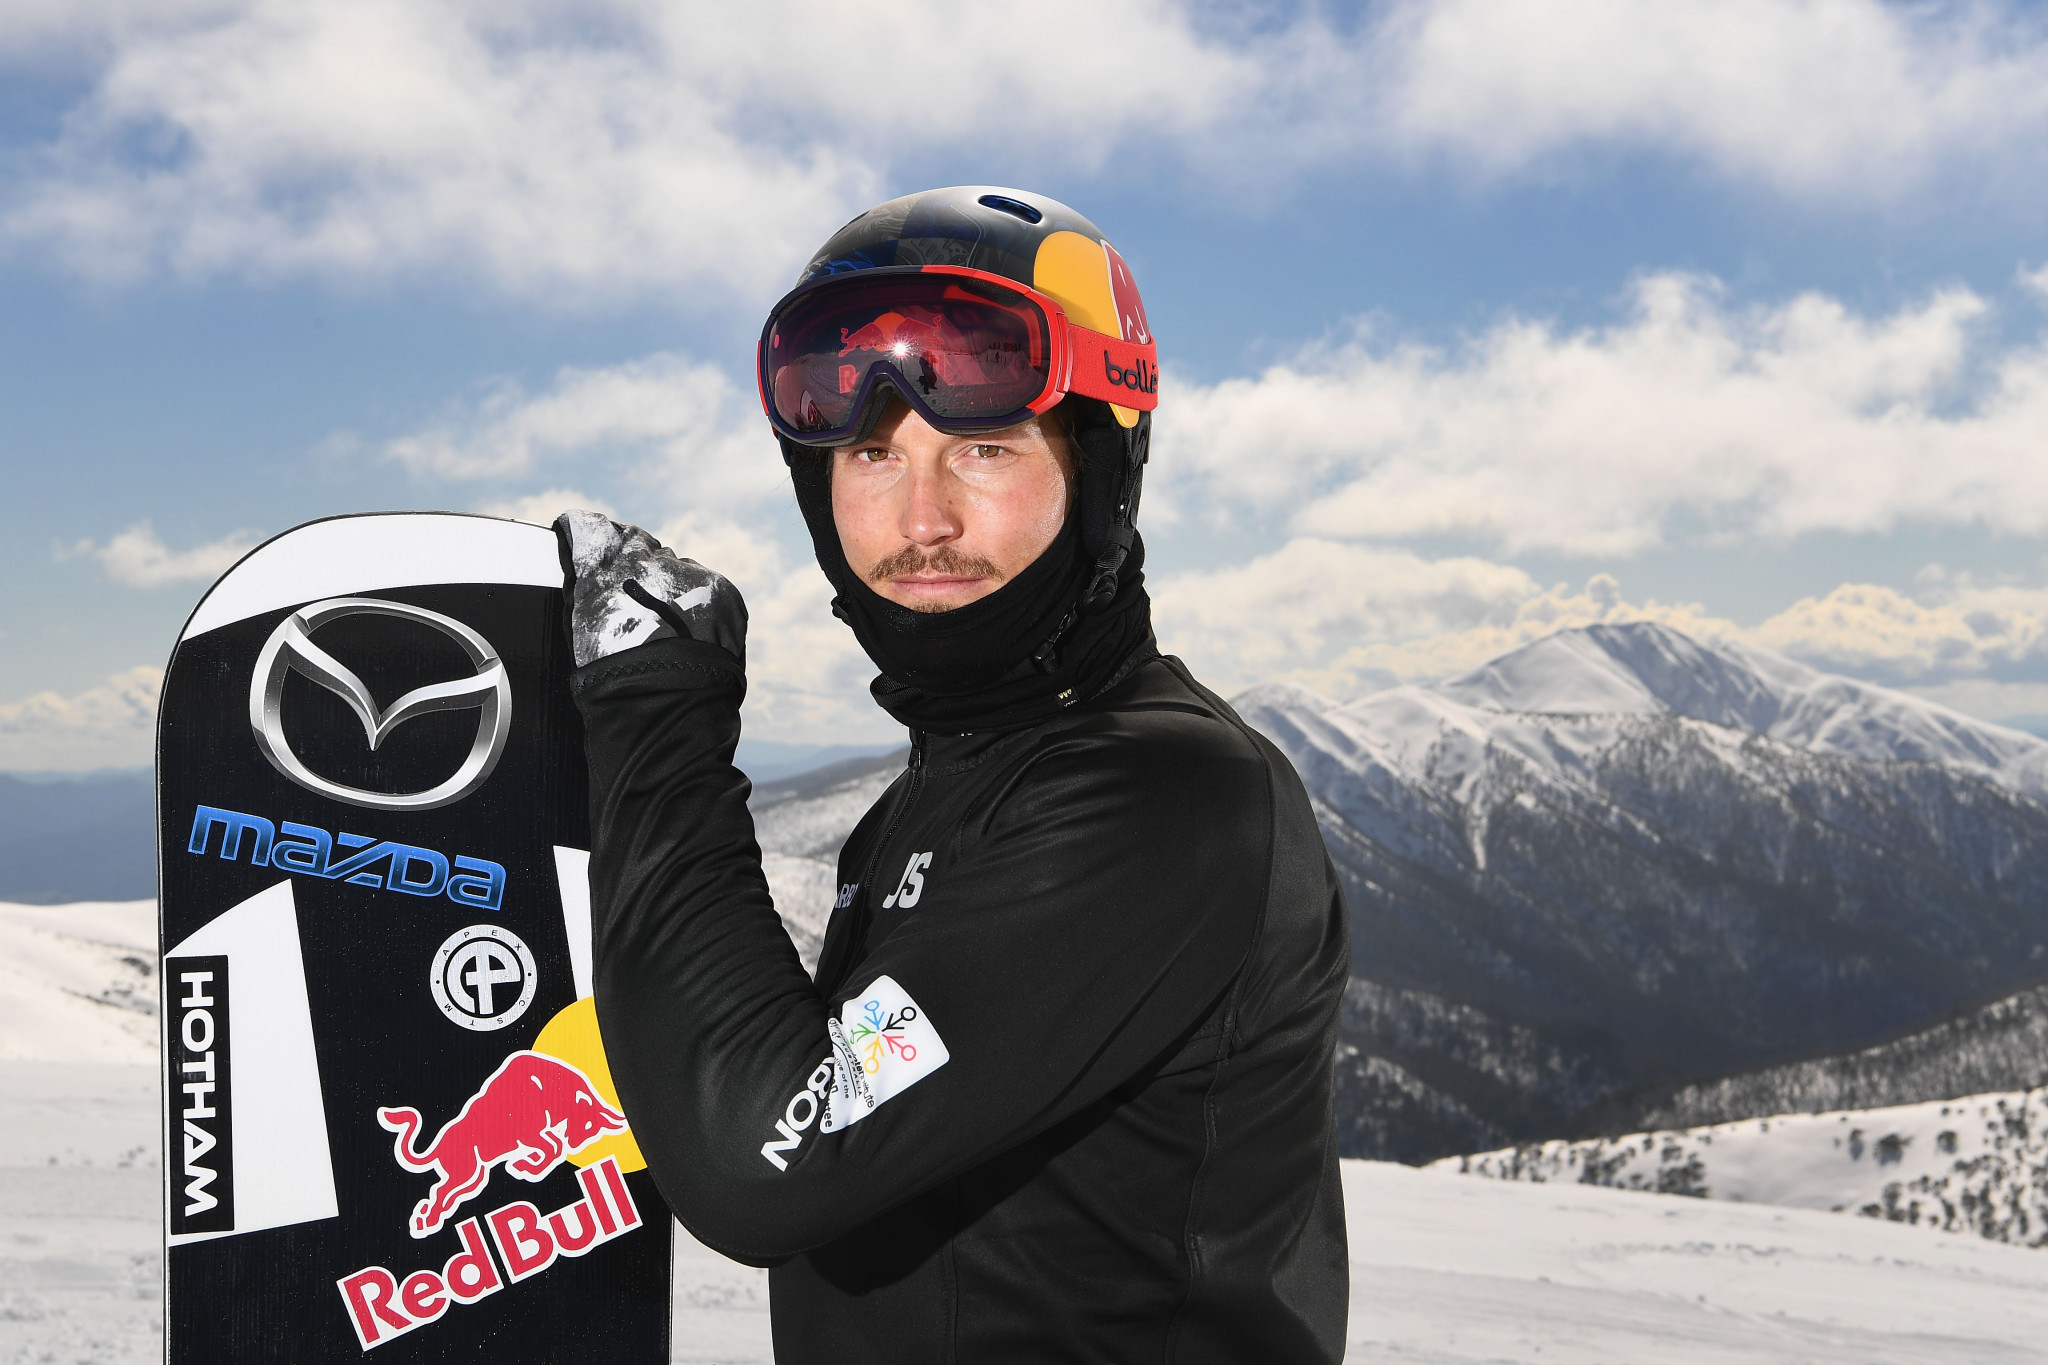 Tributes paid after tragic death of two-time world champion snowboarder Pullin